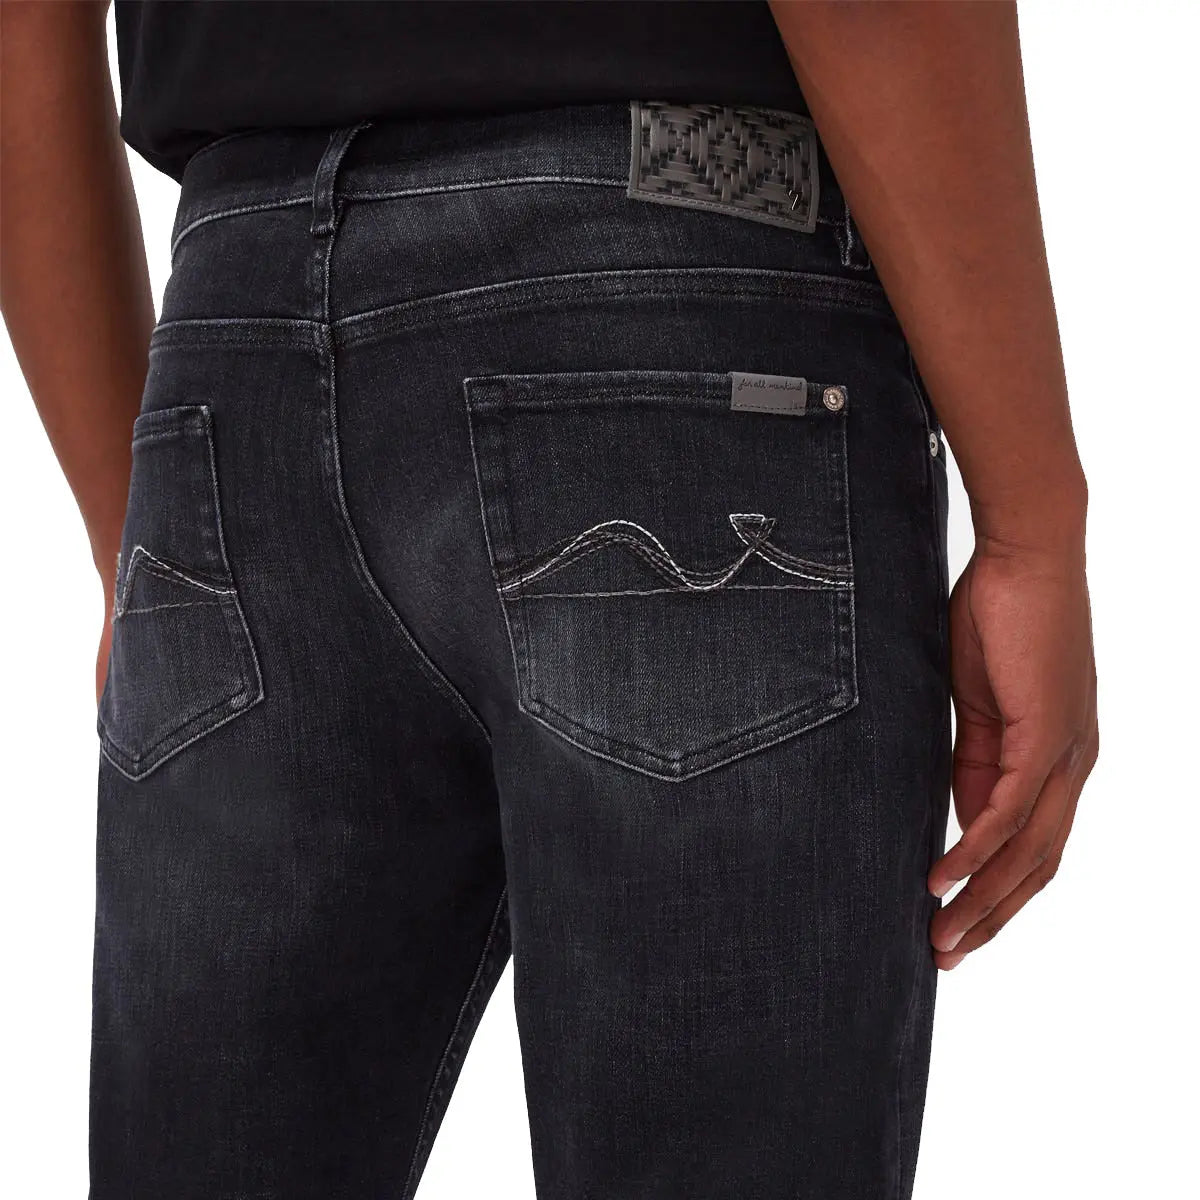 Black Special Edition Slimmy Tapered Jeans  7 For All Mankind   